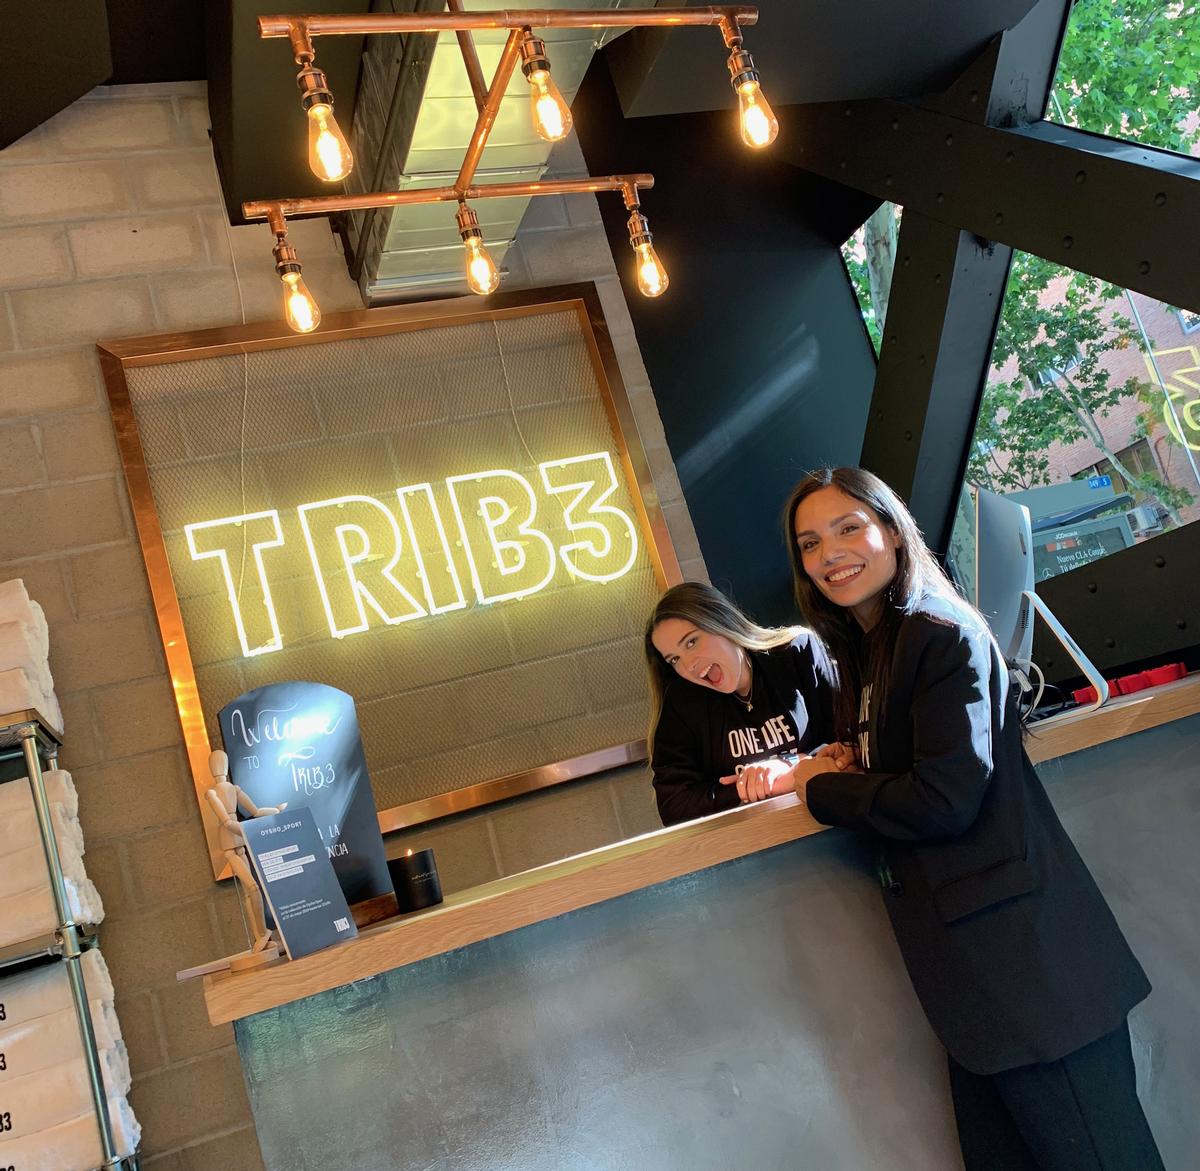 The opening is part of TRIB3's plans to expand its presence in Spain